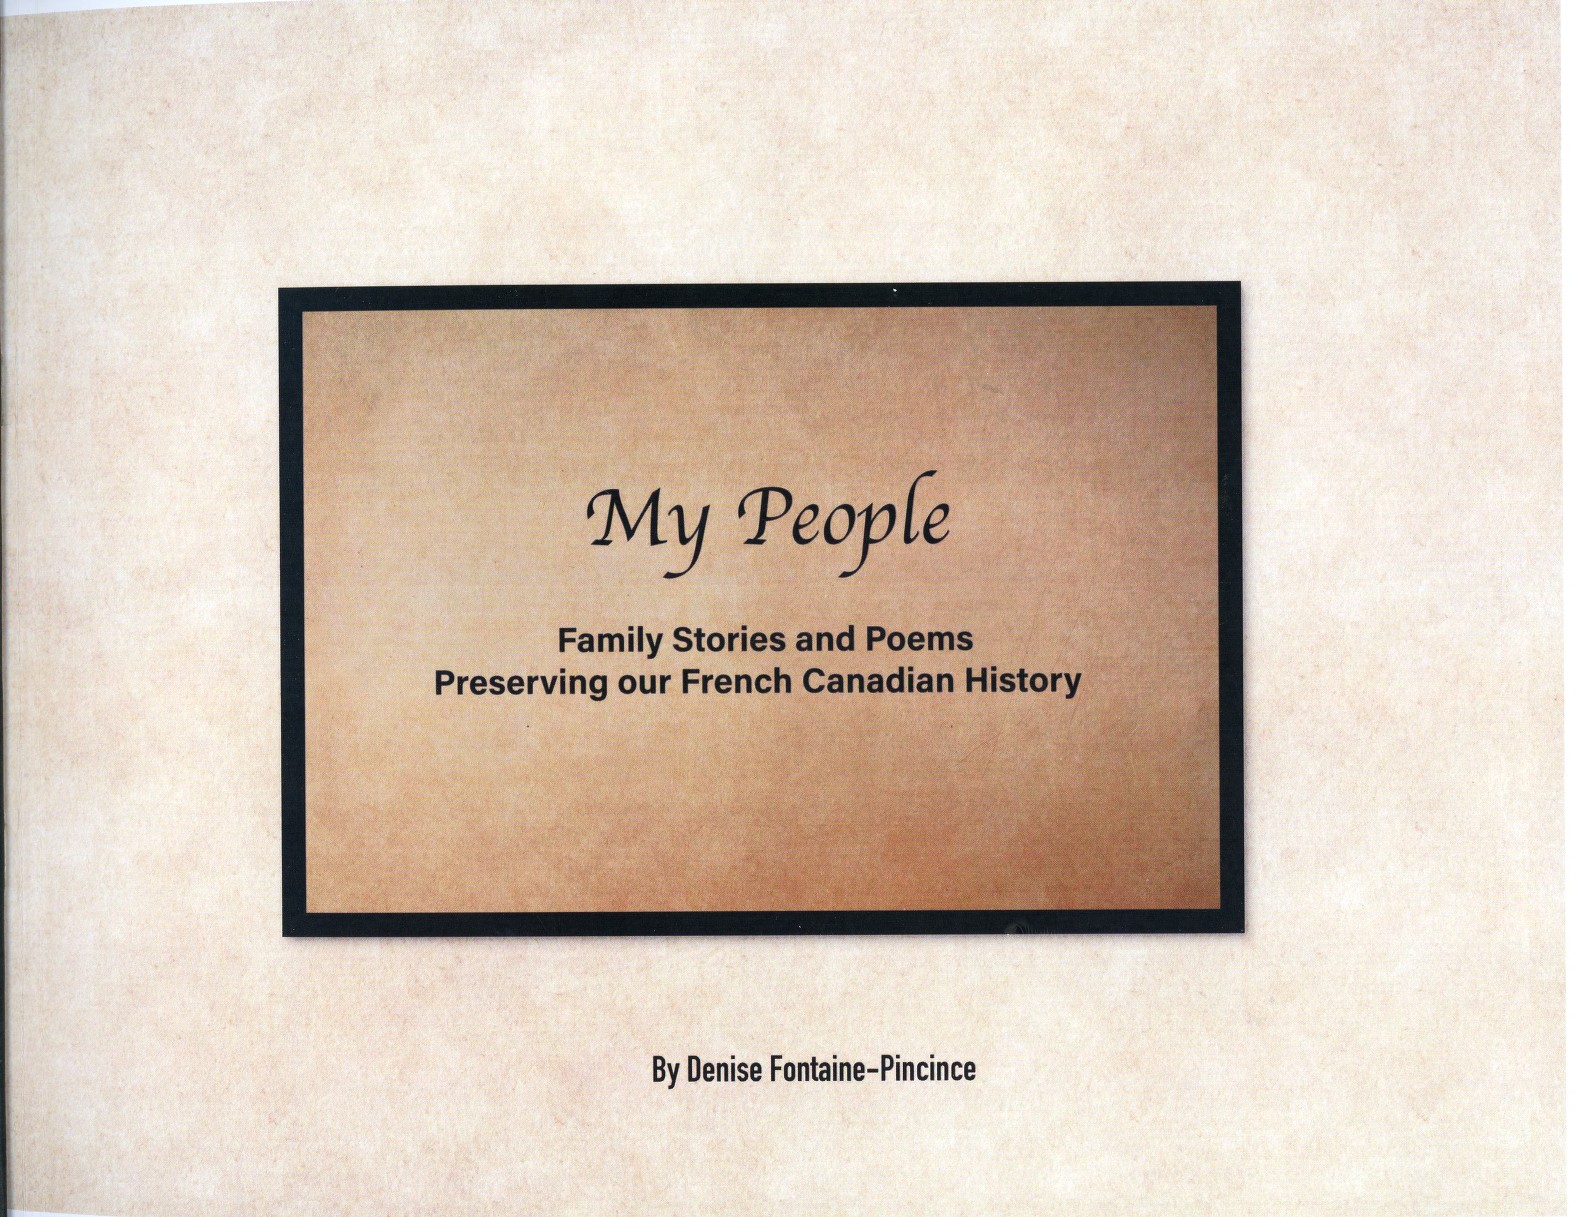 Title page of Denise Fontaine-Pincince's book.